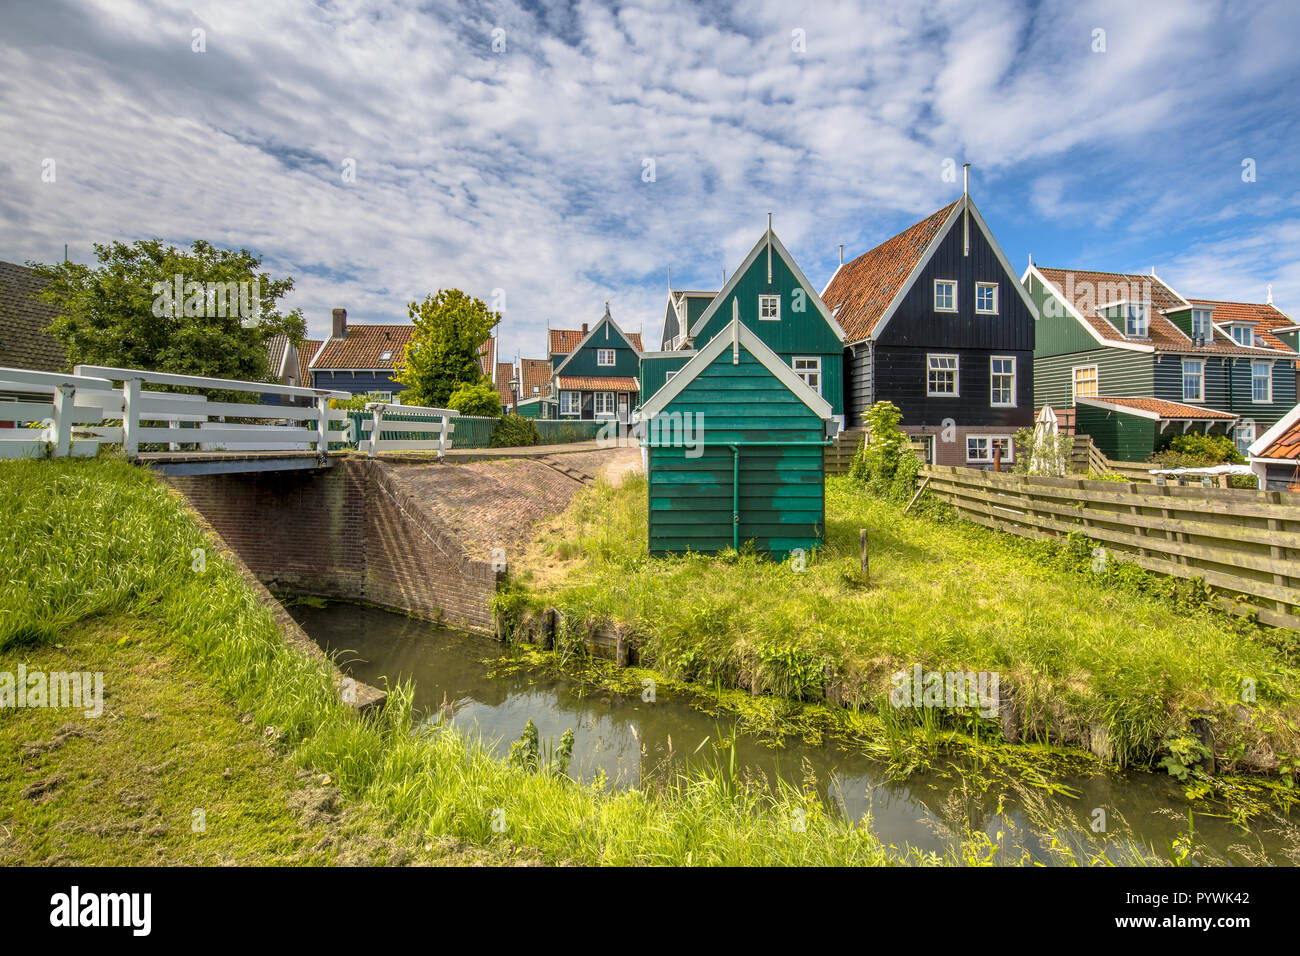 Characteristic Dutch village scene with colorful wooden houses and bridge with dike over canal on the island of Marken in the Ijsselmeer or formerly Z Stock Photo